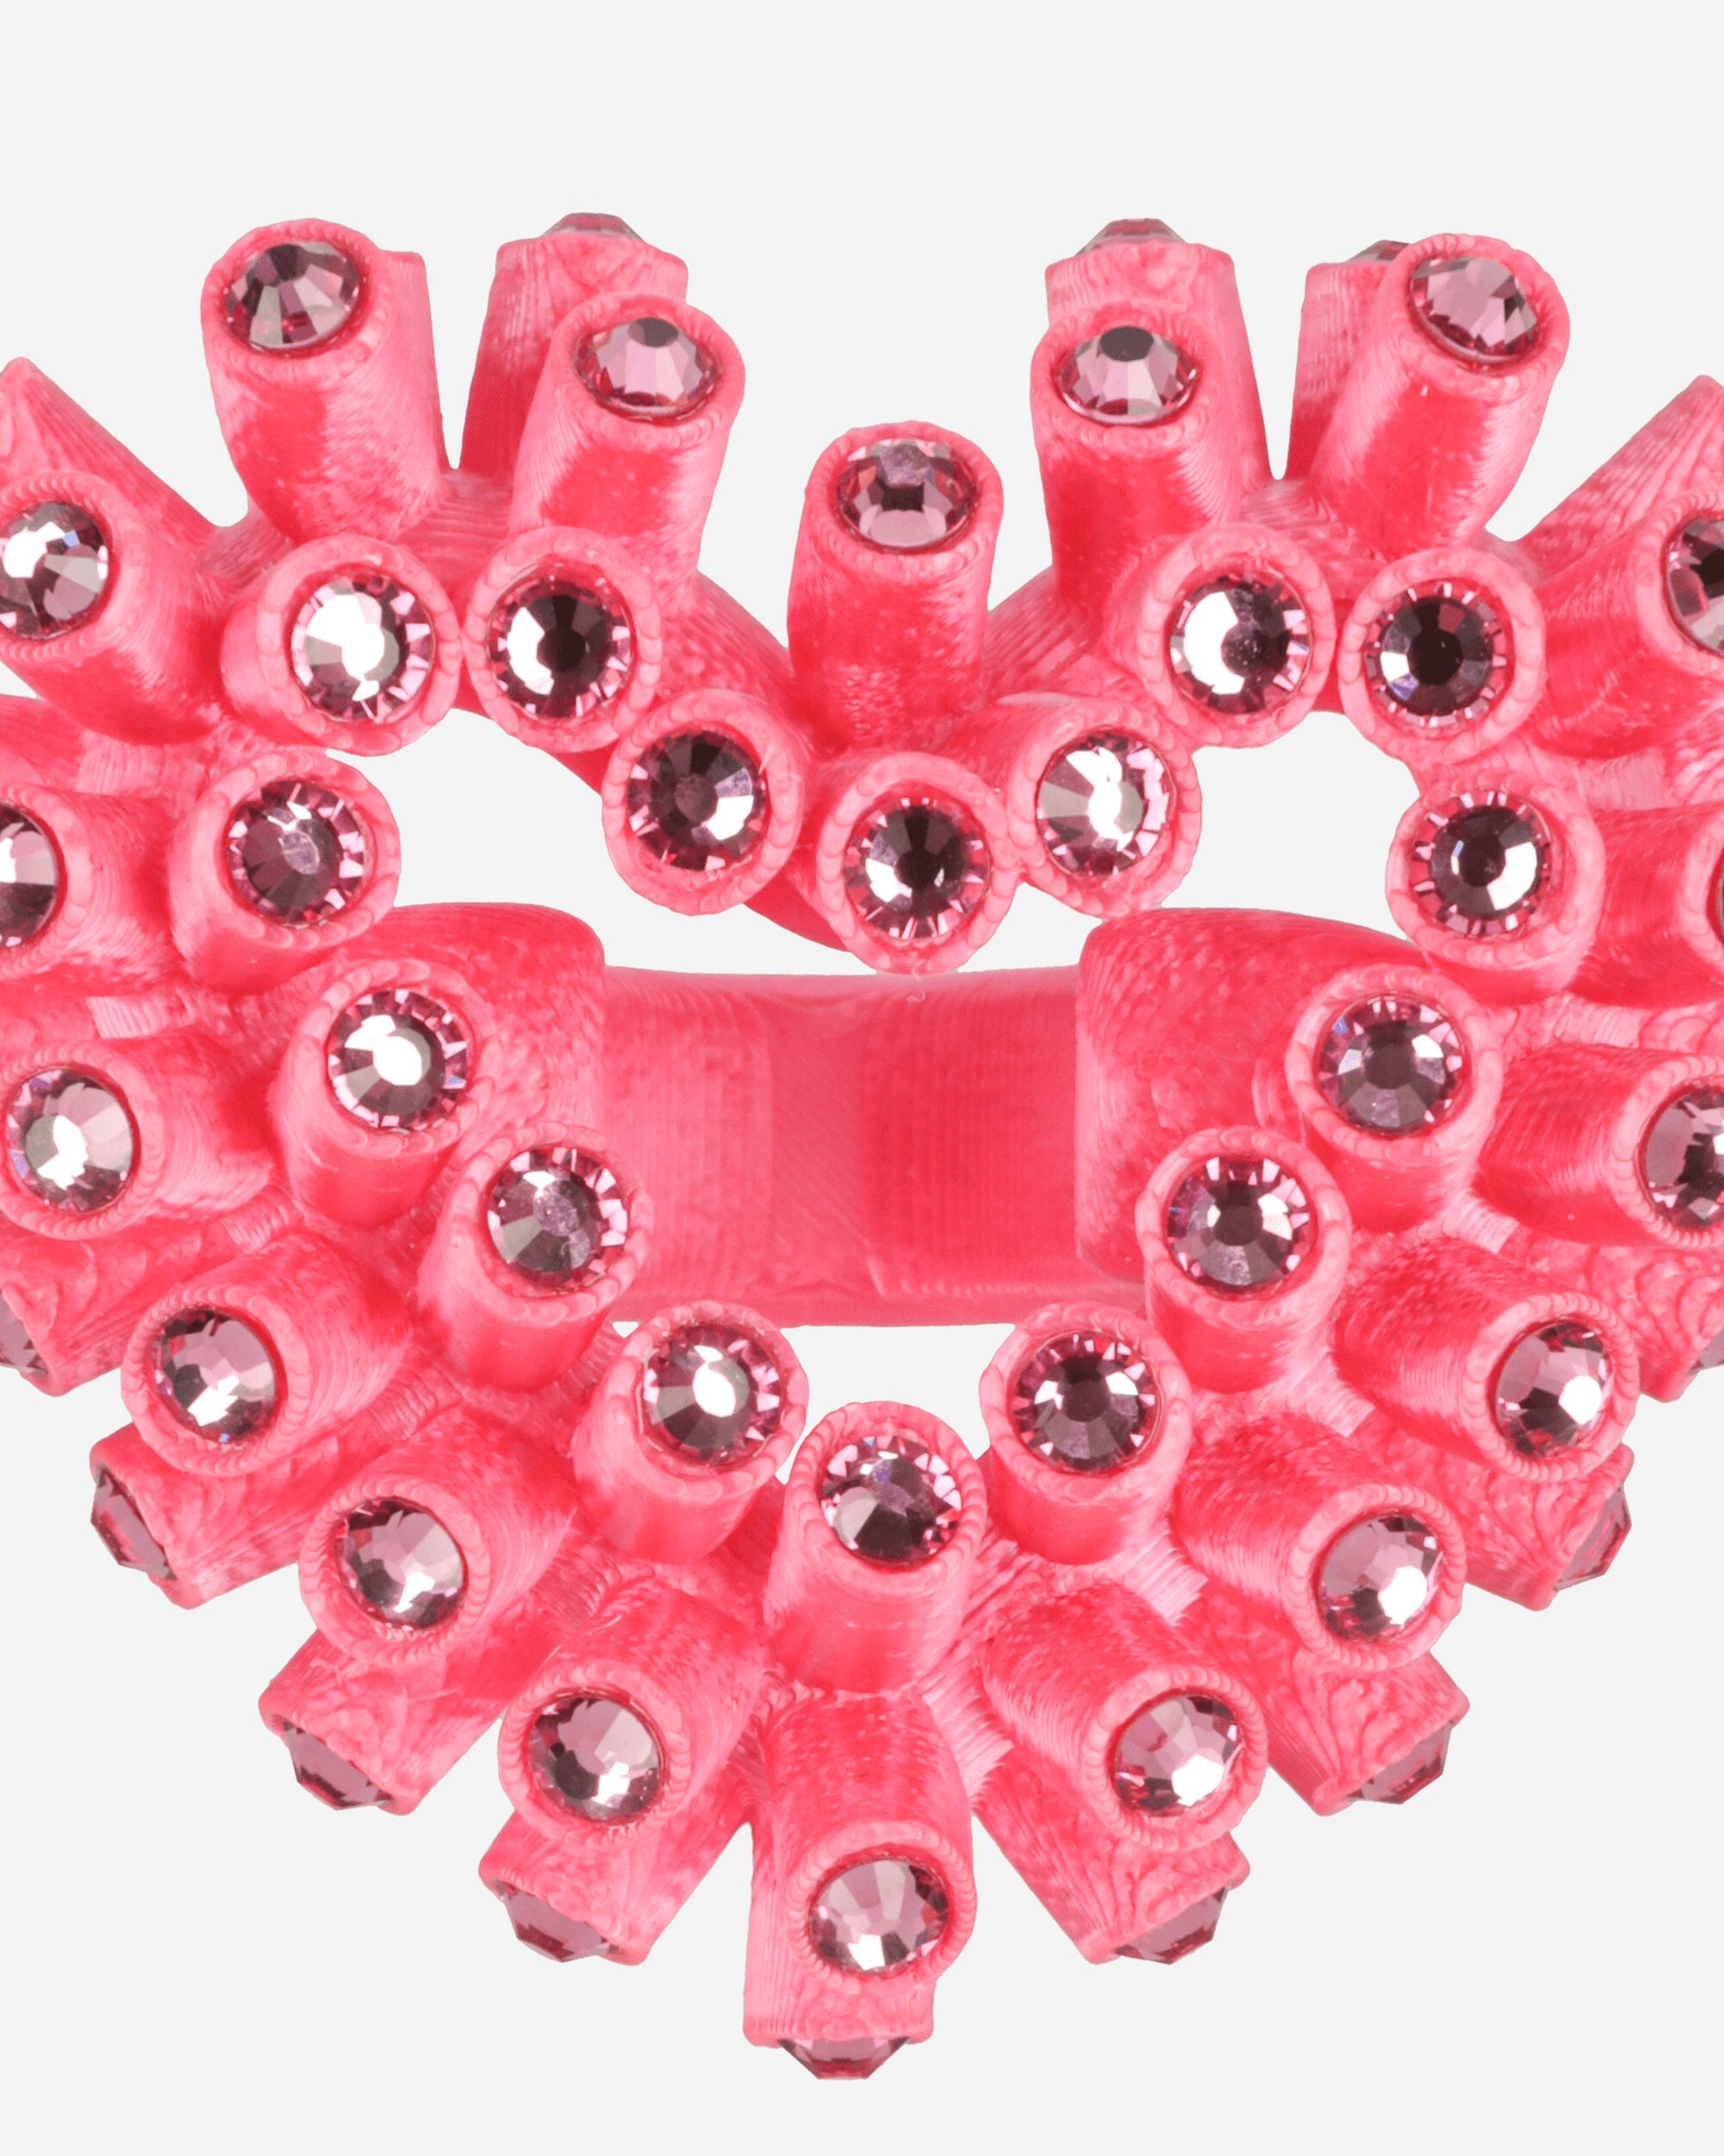 Roussey Wmns Crush Ring Shocking Pink Jewellery Rings 21R07 2